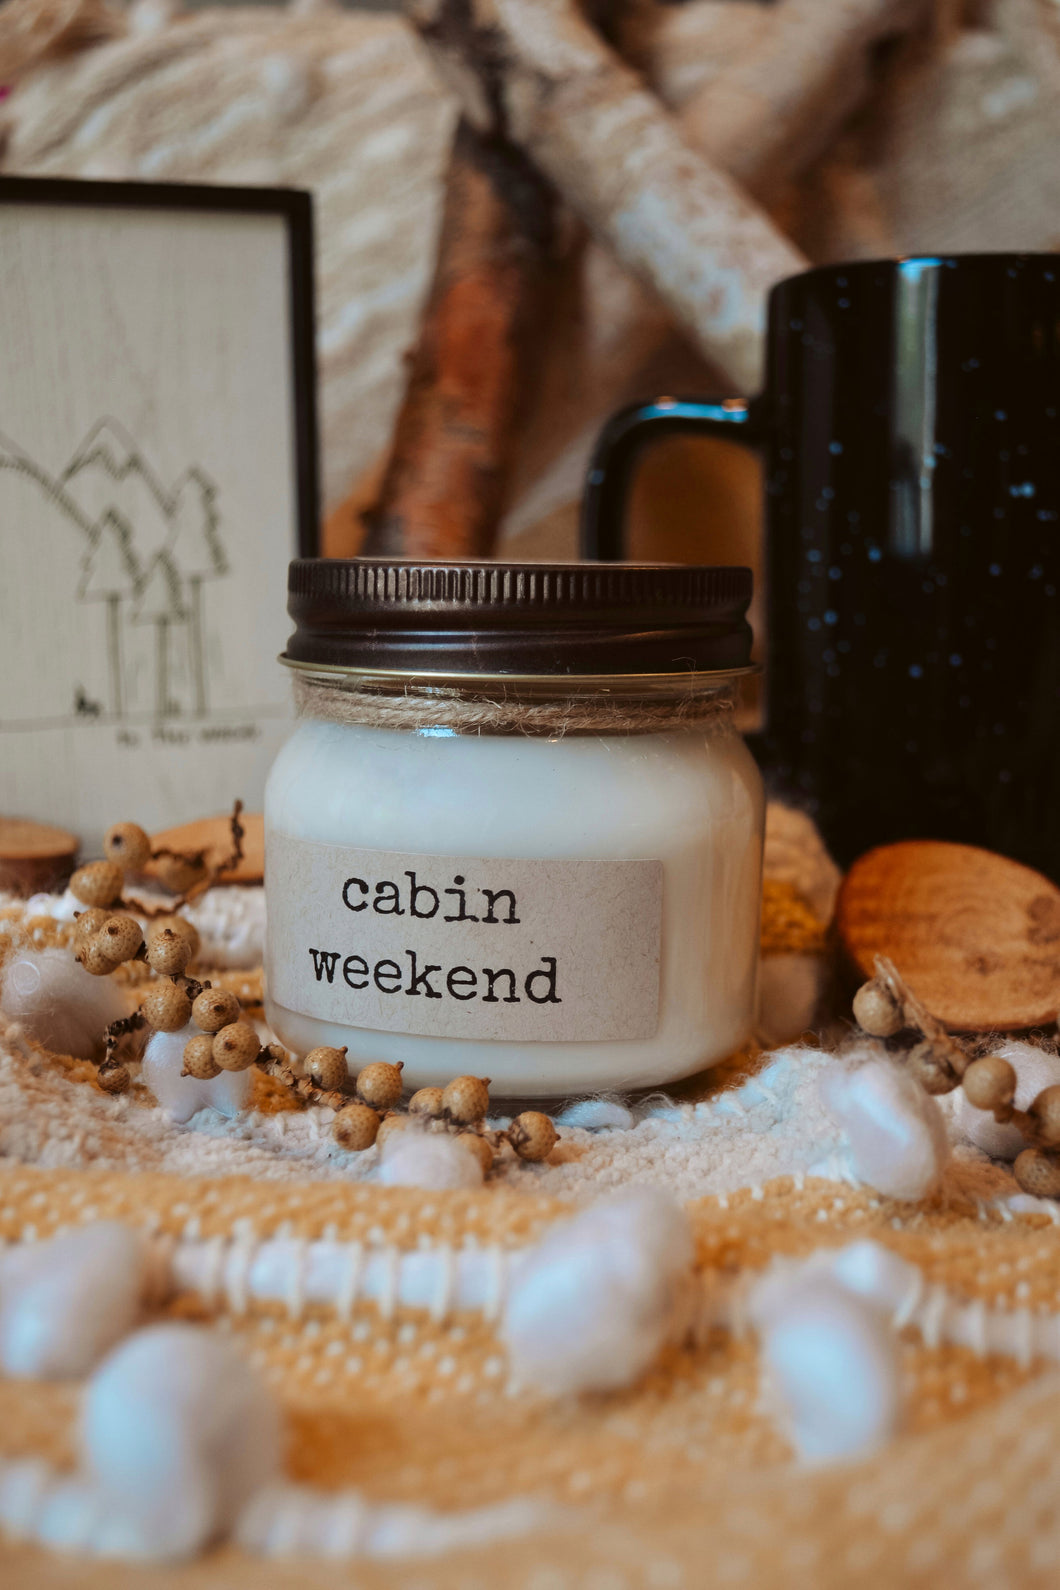 Cabin Weekend Soy Candle